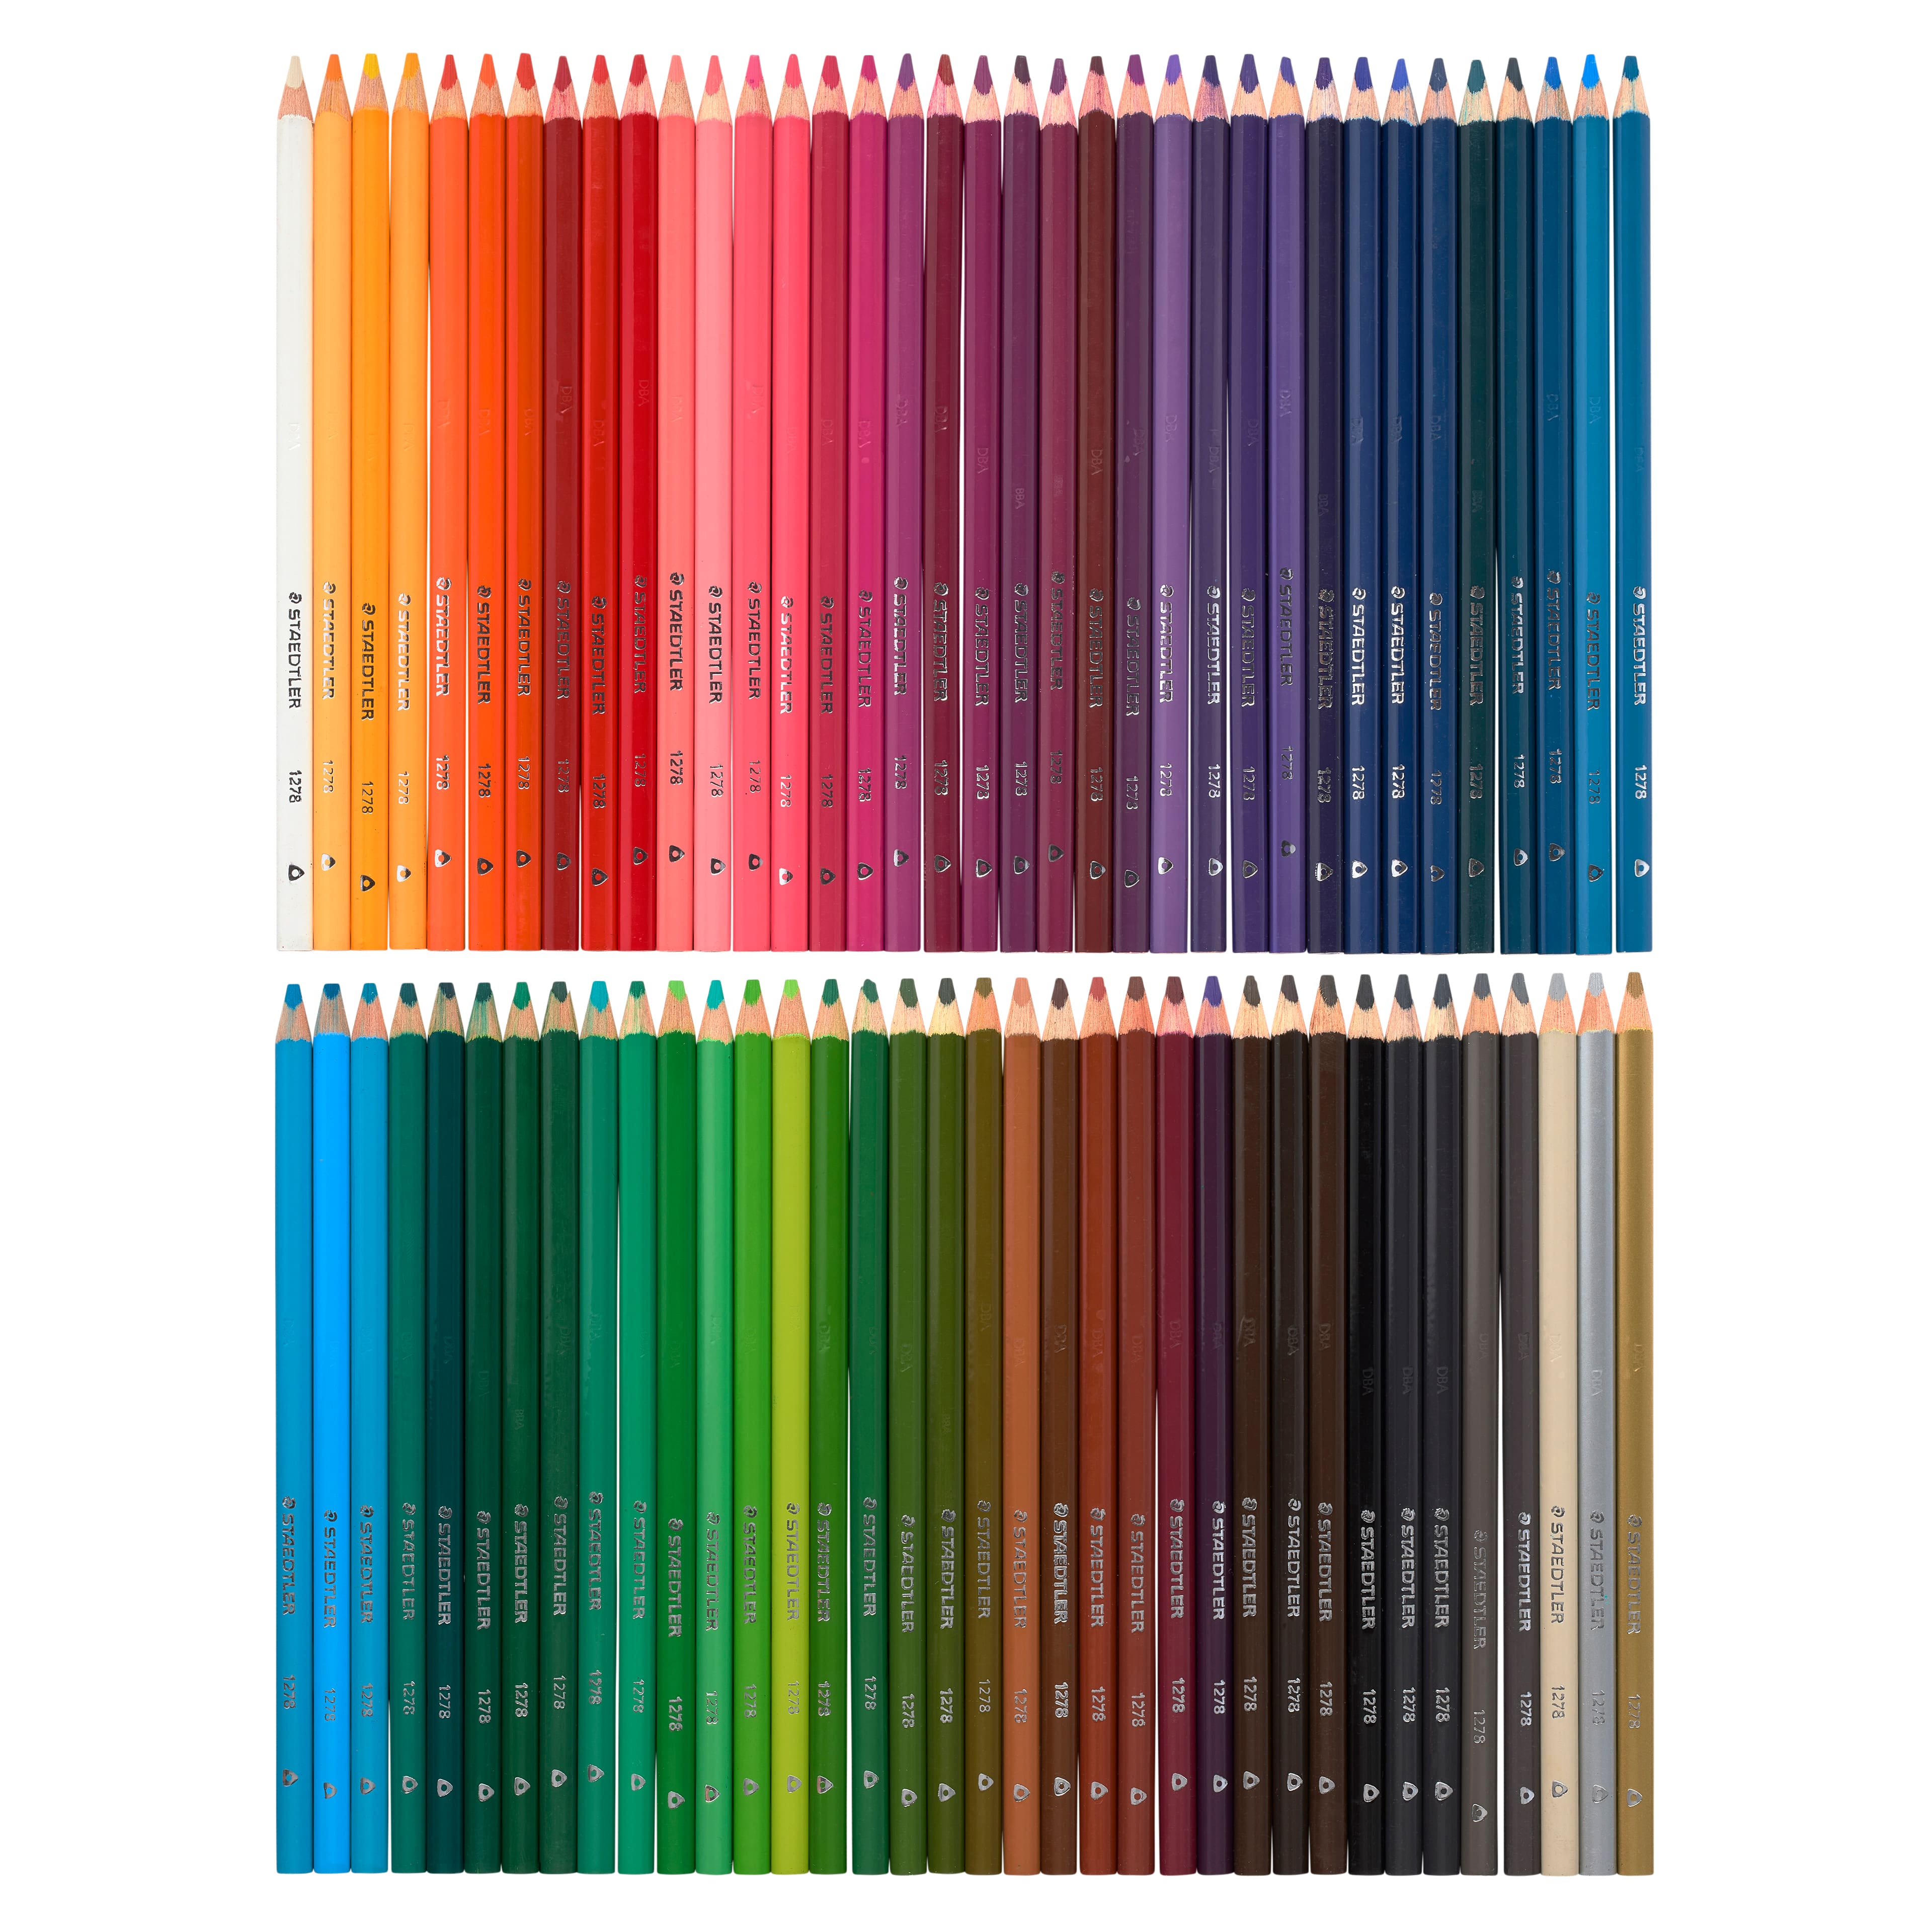 Staedtler Triangular Colored Pencils Set of 120 #1270C120A6 (DISC)